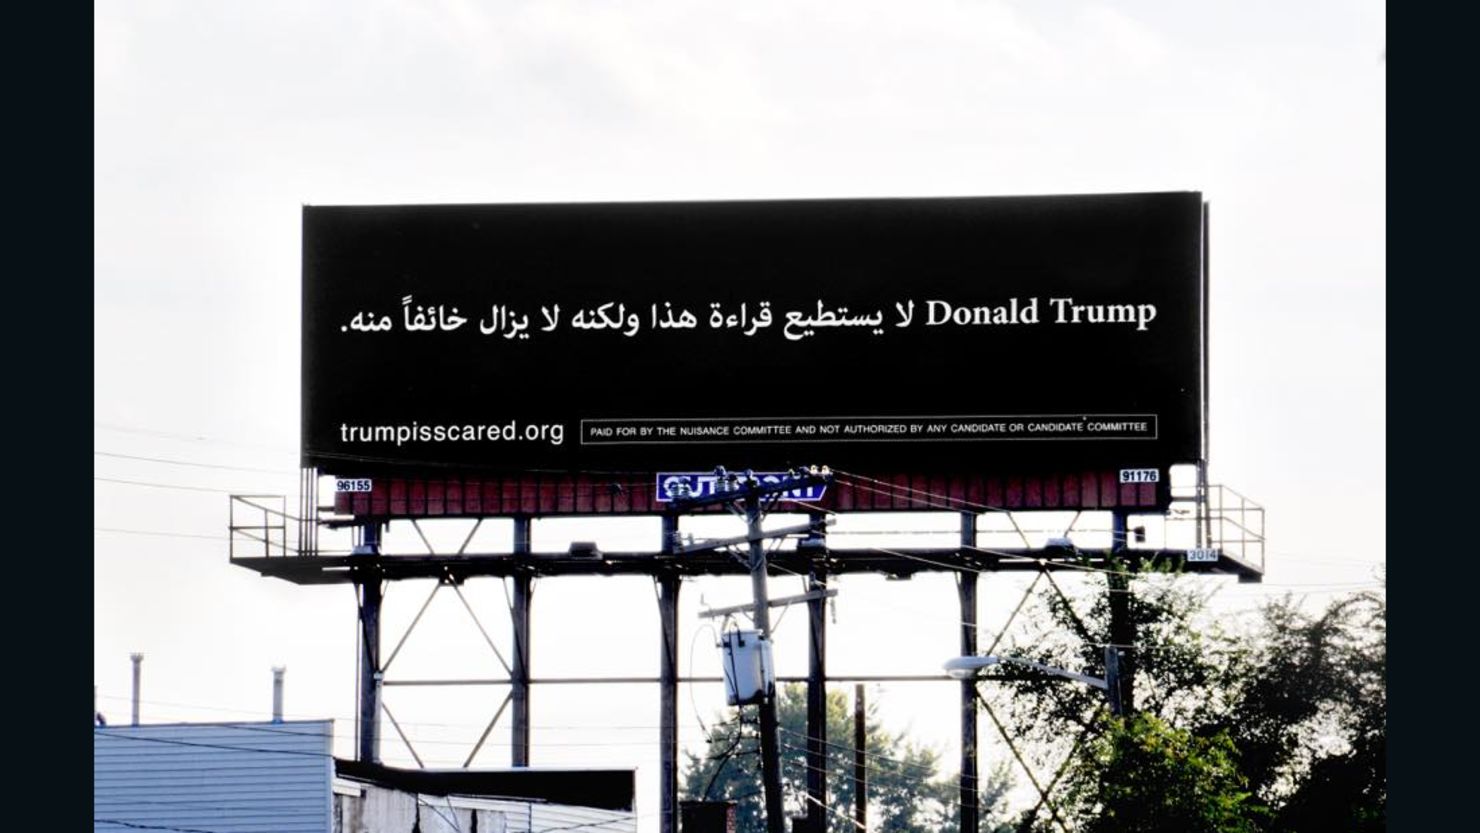 A billboard in Dearborn, Michigan, reads "Donald Trump can't read this, but he's afraid of it anyway" in Arabic.